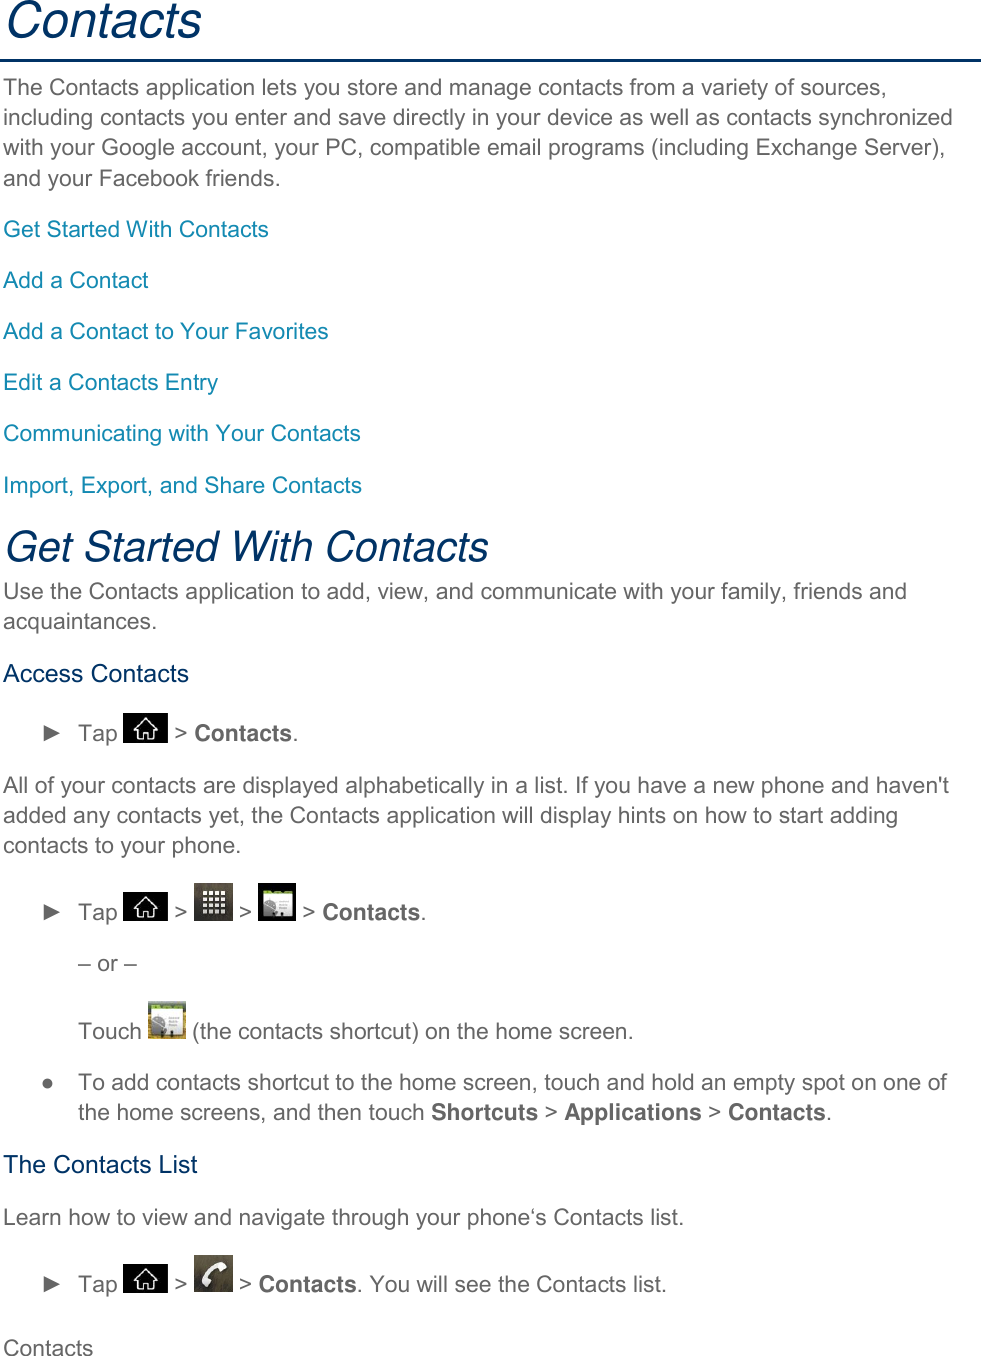 Contacts     Contacts The Contacts application lets you store and manage contacts from a variety of sources, including contacts you enter and save directly in your device as well as contacts synchronized with your Google account, your PC, compatible email programs (including Exchange Server), and your Facebook friends. Get Started With Contacts Add a Contact Add a Contact to Your Favorites Edit a Contacts Entry Communicating with Your Contacts Import, Export, and Share Contacts Get Started With Contacts Use the Contacts application to add, view, and communicate with your family, friends and acquaintances. Access Contacts ►  Tap   &gt; Contacts. All of your contacts are displayed alphabetically in a list. If you have a new phone and haven&apos;t added any contacts yet, the Contacts application will display hints on how to start adding contacts to your phone. ►  Tap   &gt;   &gt;   &gt; Contacts. – or –  Touch   (the contacts shortcut) on the home screen. ●  To add contacts shortcut to the home screen, touch and hold an empty spot on one of the home screens, and then touch Shortcuts &gt; Applications &gt; Contacts. The Contacts List Learn how to view and navigate through your phone‘s Contacts list. ►  Tap   &gt;   &gt; Contacts. You will see the Contacts list. 